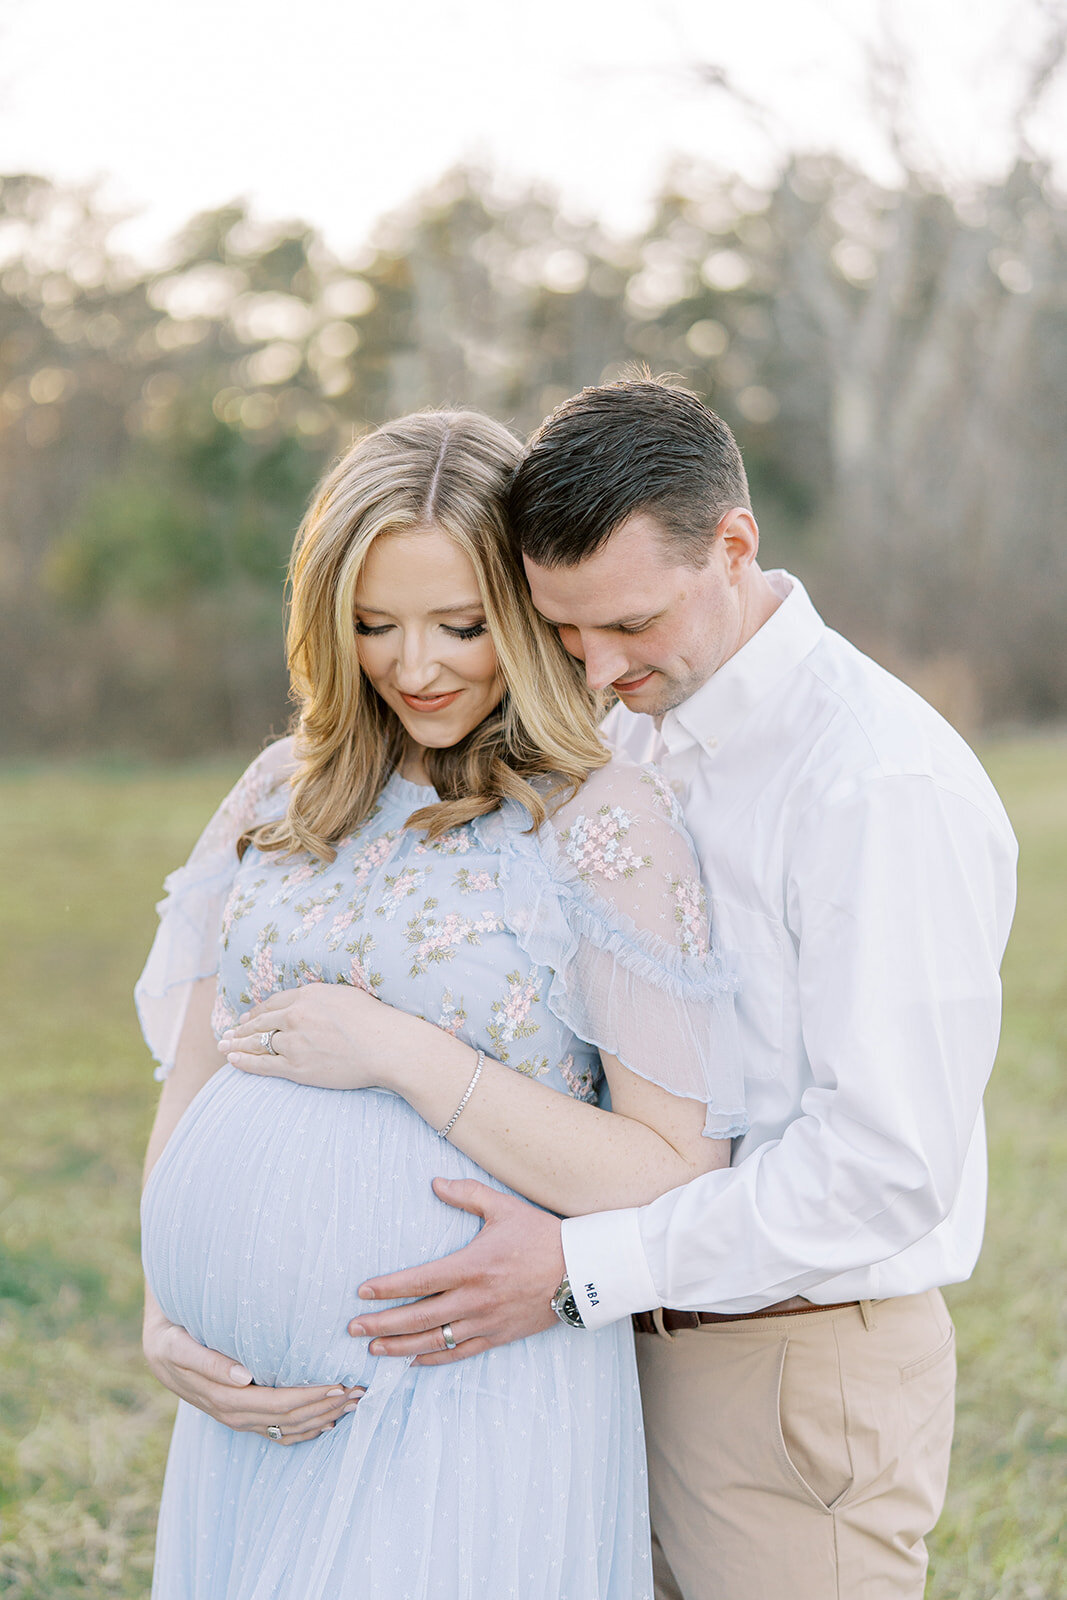 Maternity Session in blue dress in field by Atlanta Maternity Photographer Lindsey Powell